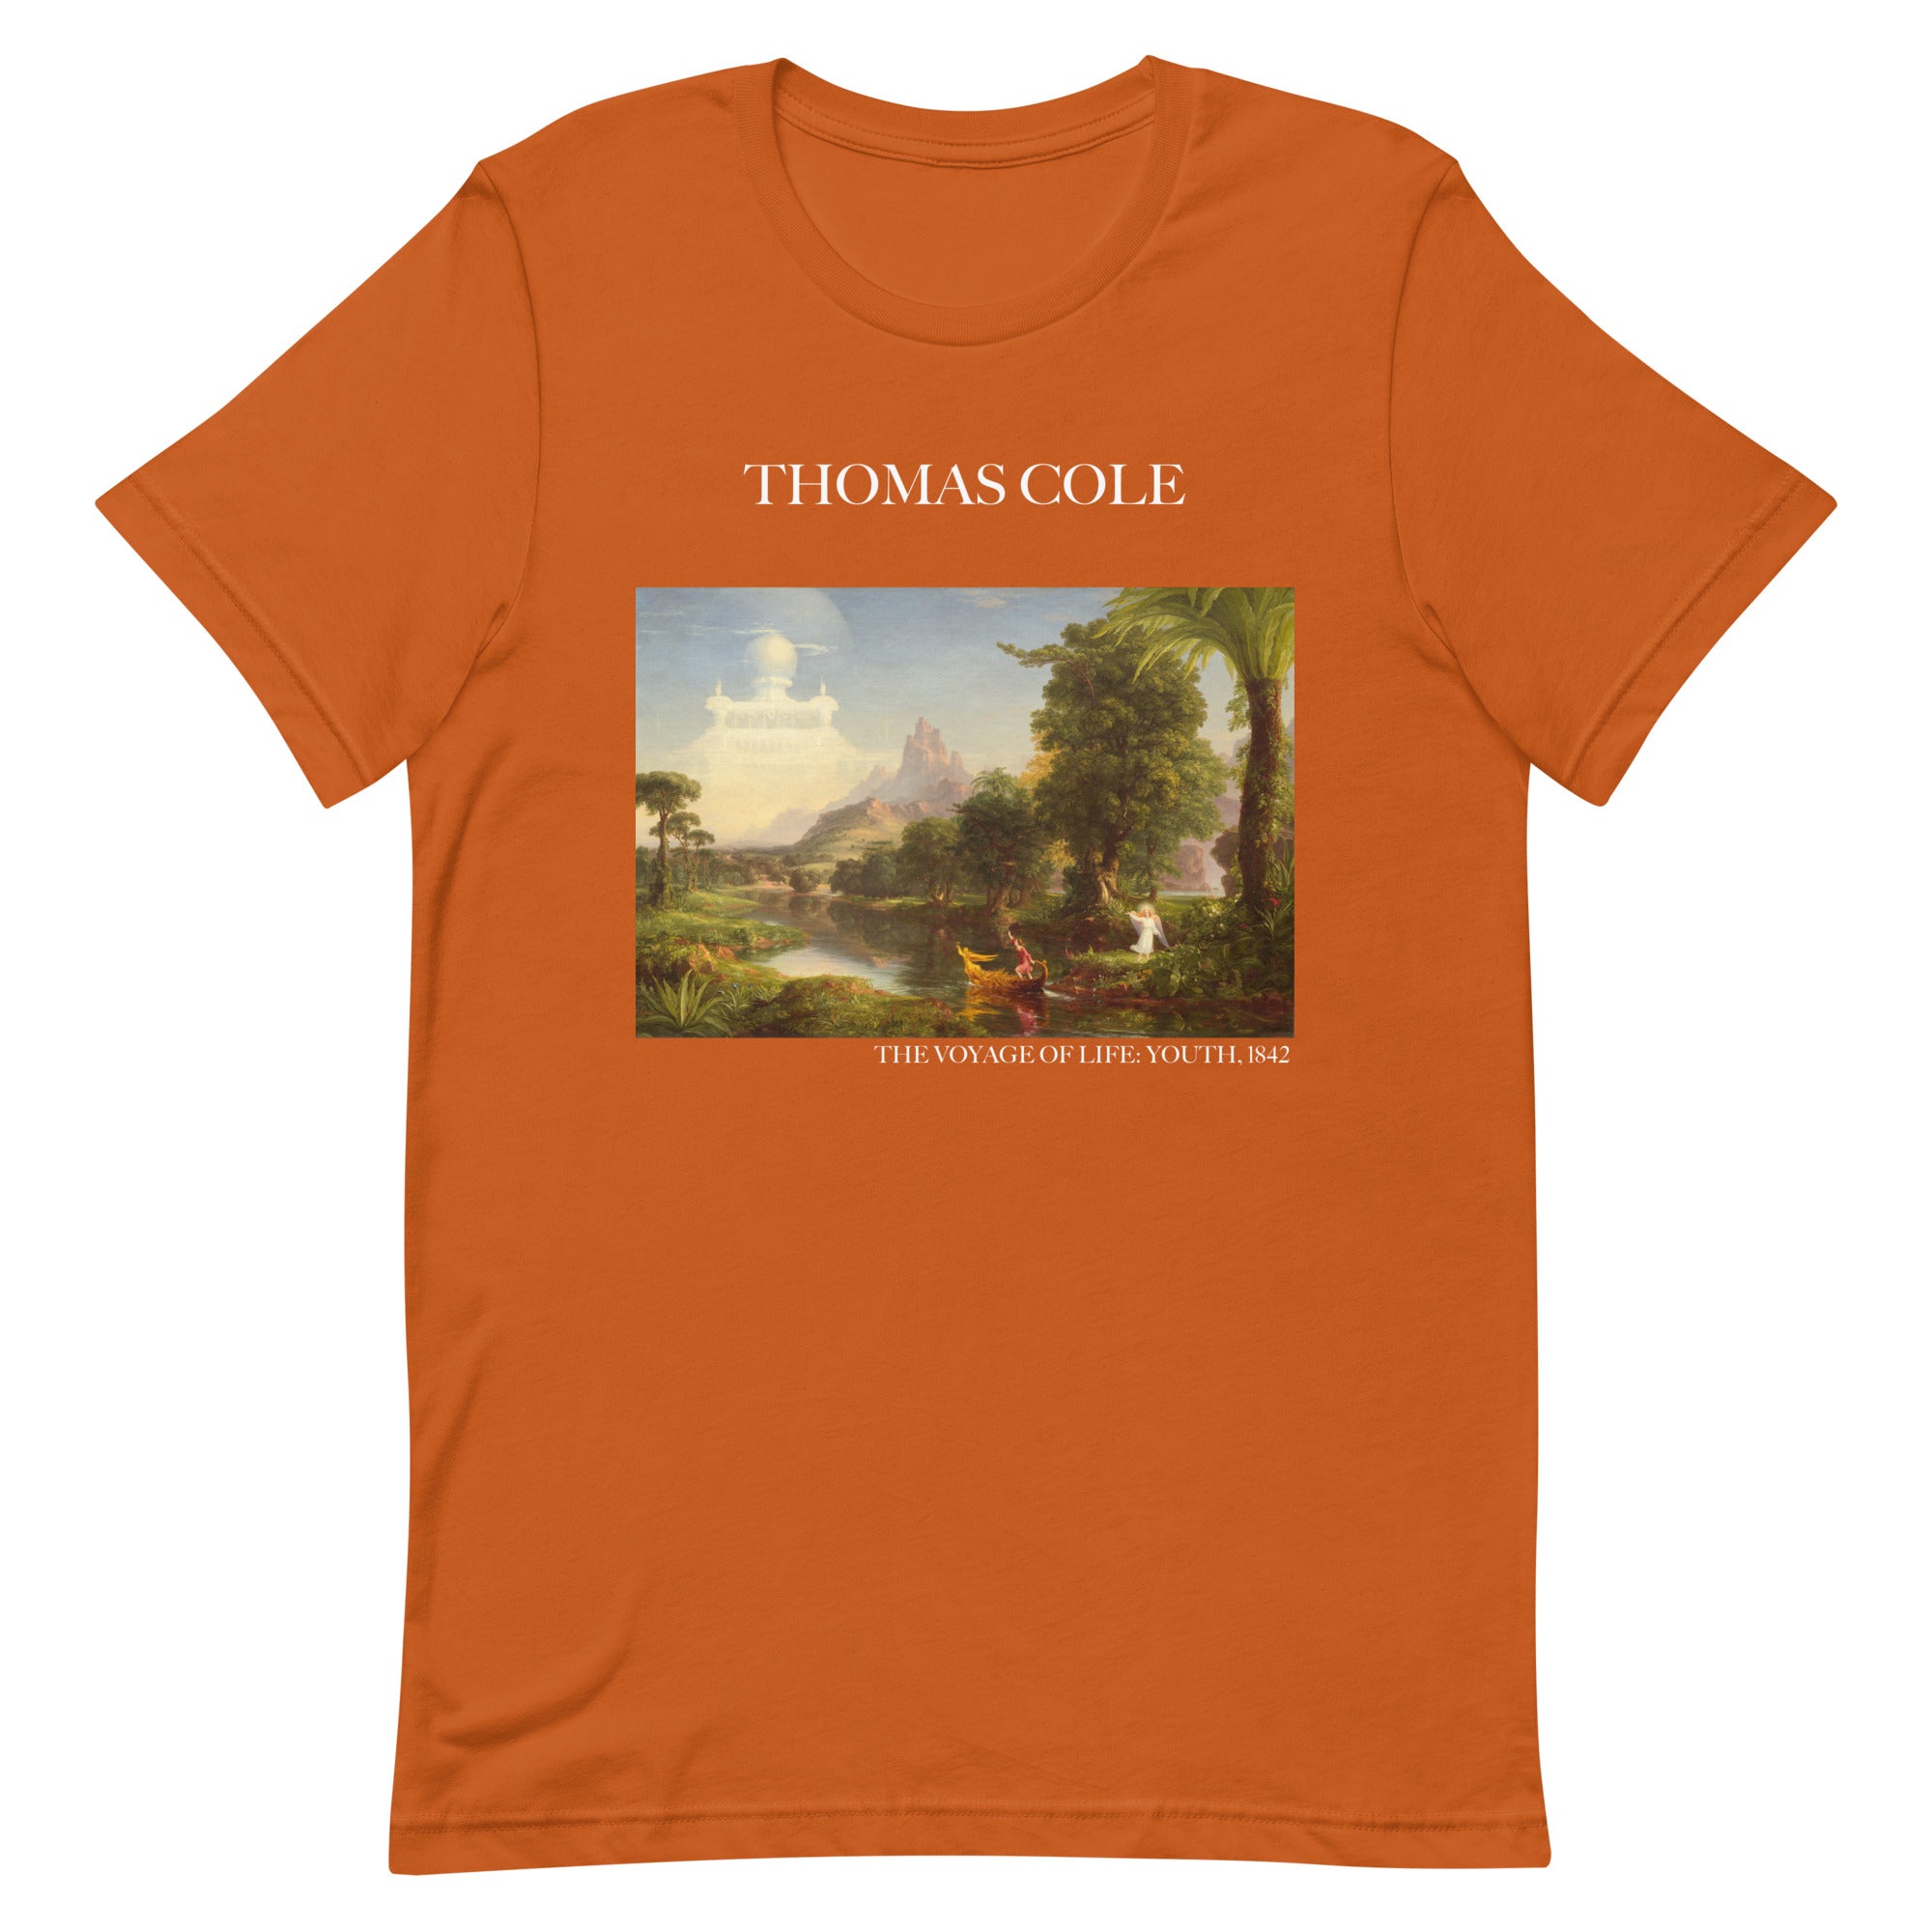 Thomas Cole 'The Voyage of Life: Youth' Famous Painting T-Shirt | Unisex Classic Art Tee